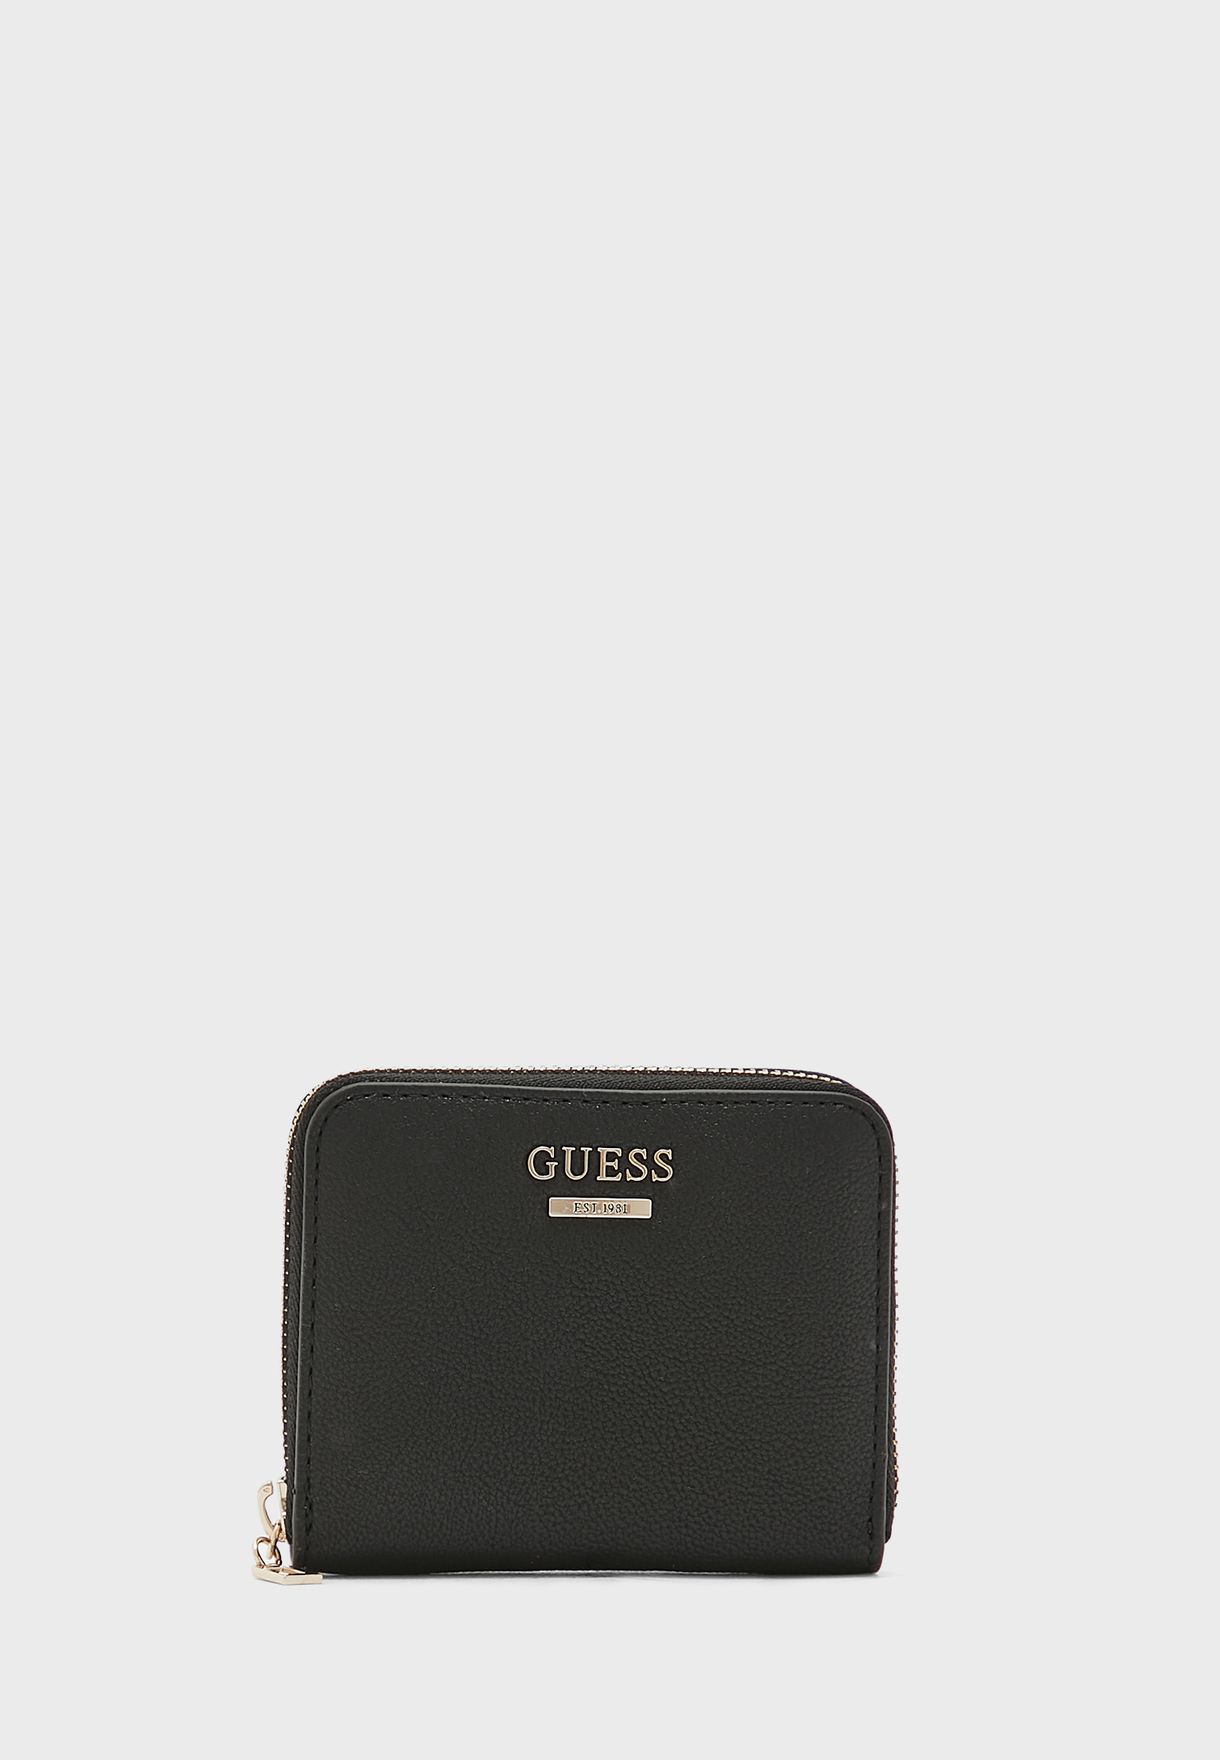 Guess Chrissy SLG Small Zip Around Black